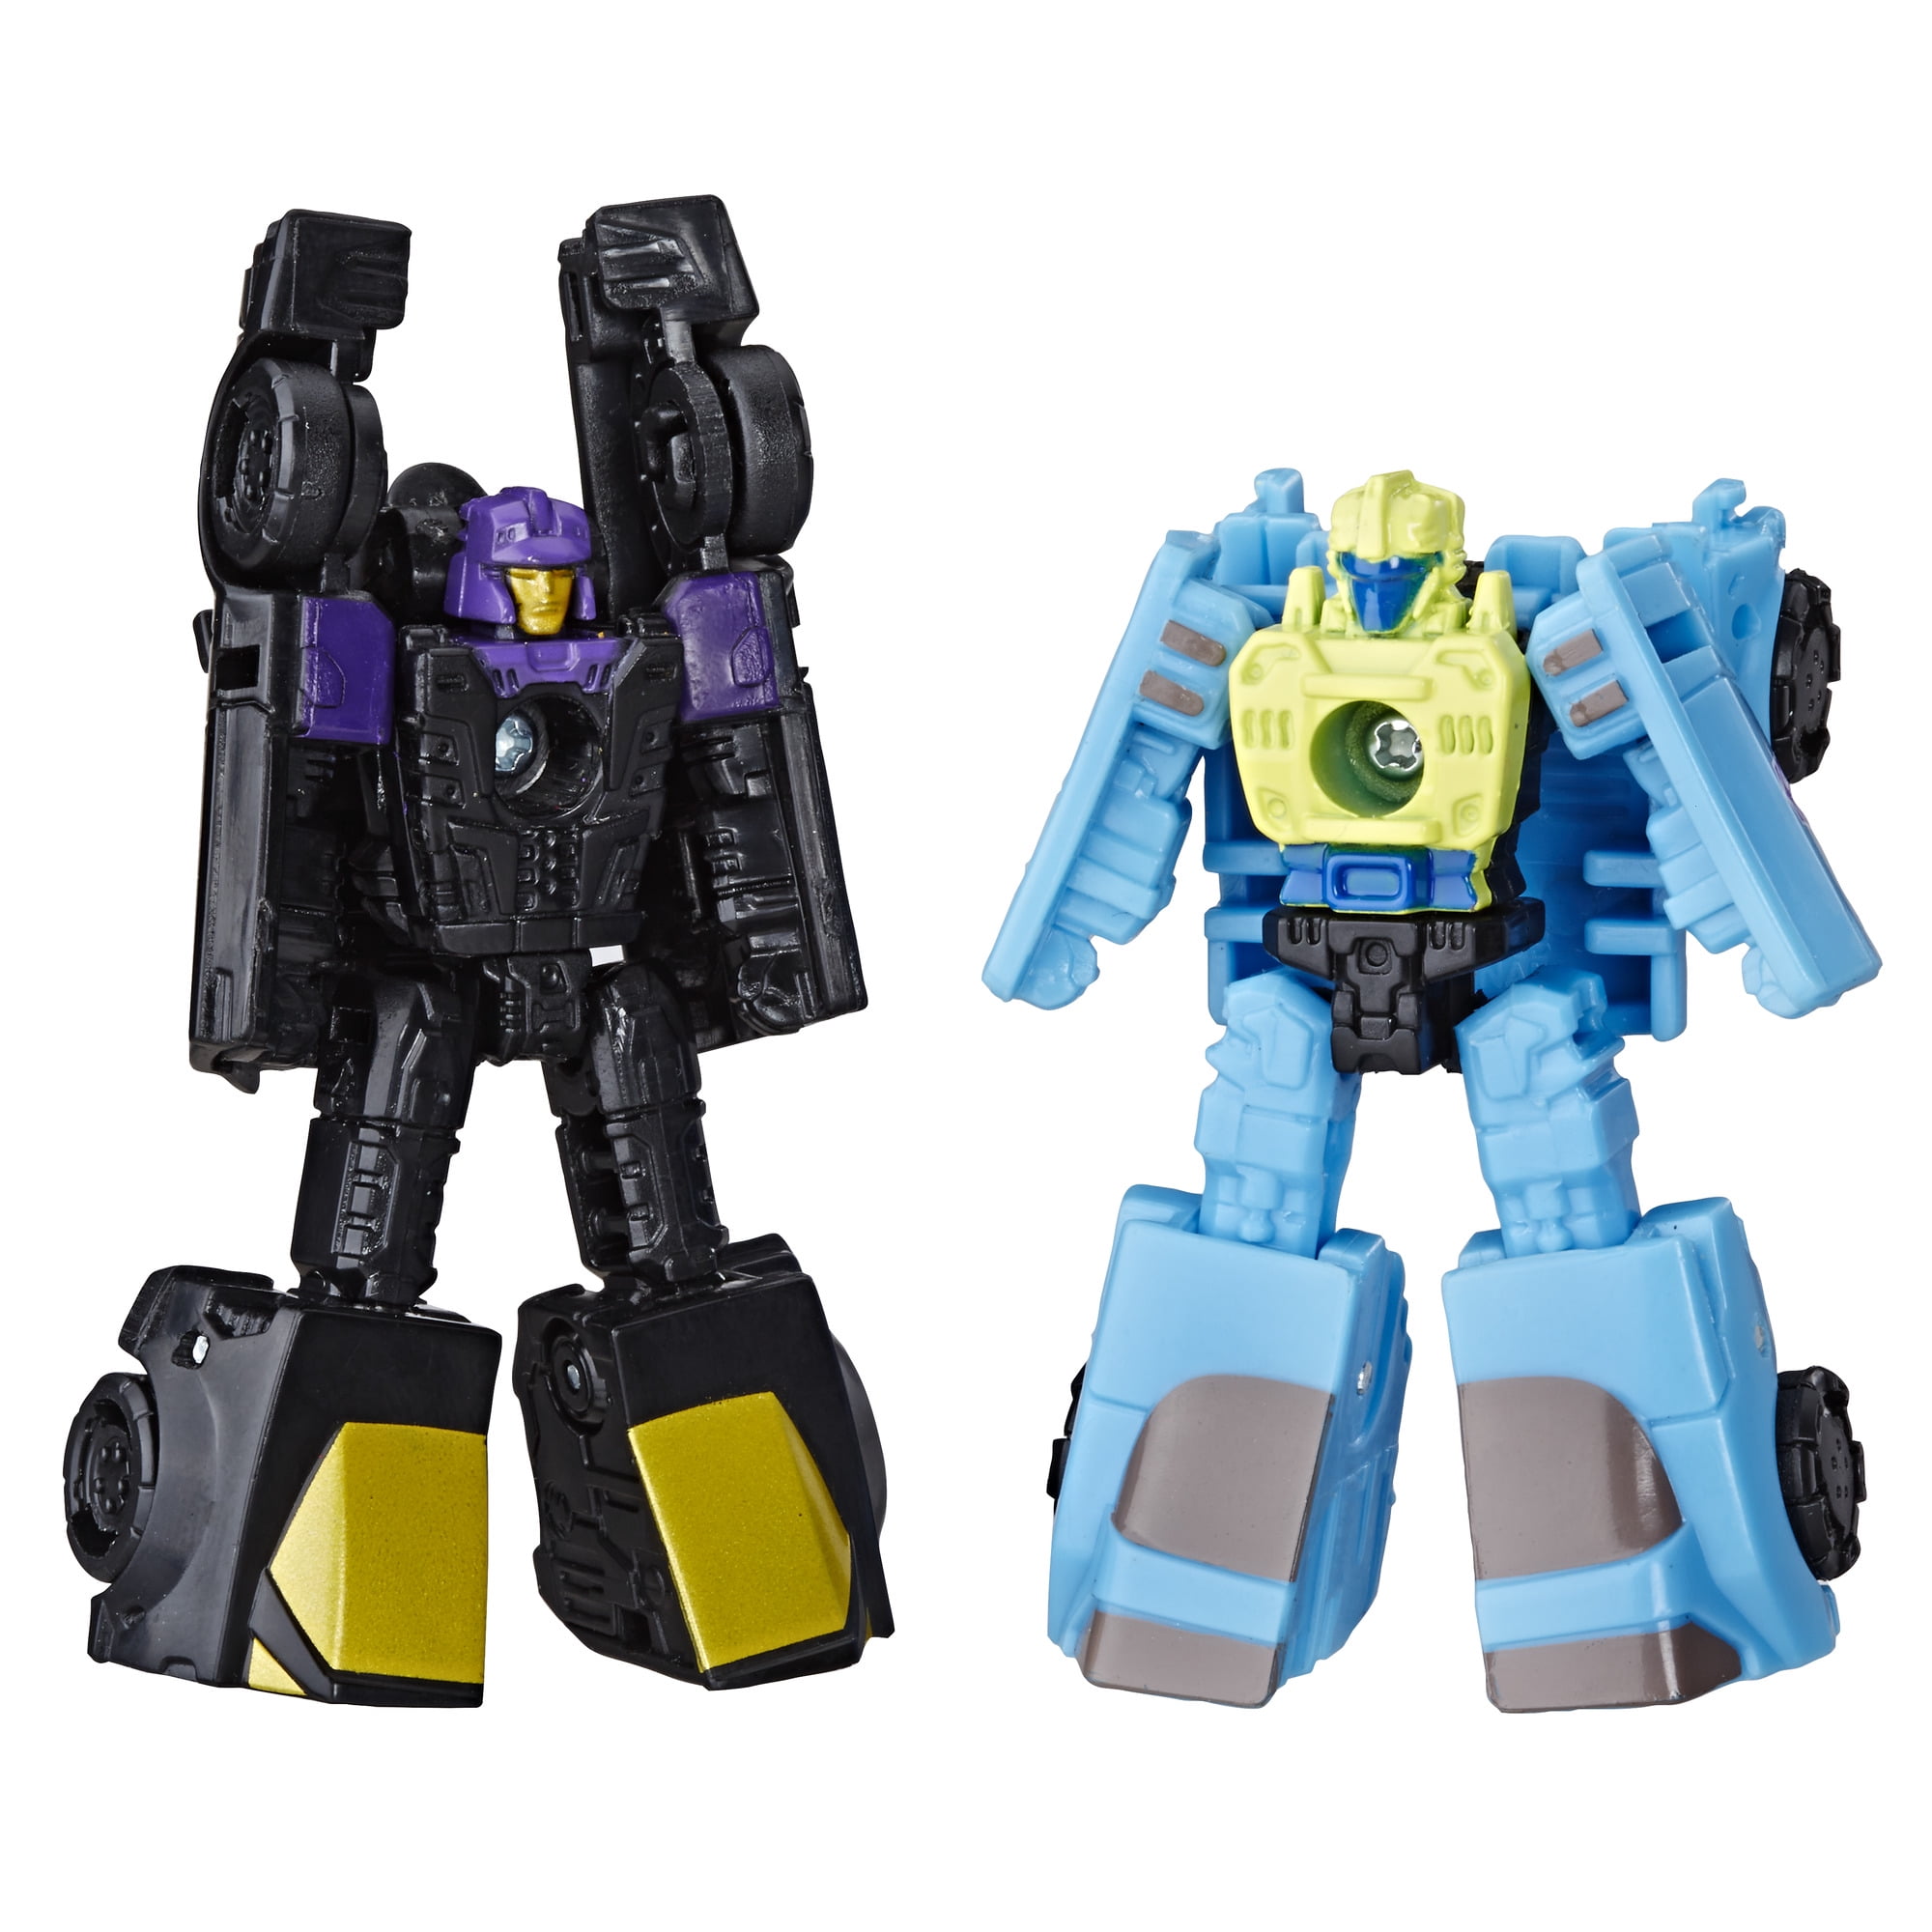 Siege Micromaster WFC-S5 Decepticon Air Strike Patrol 2-pack Action Figure Toys Transformers Generations War for Cybertron